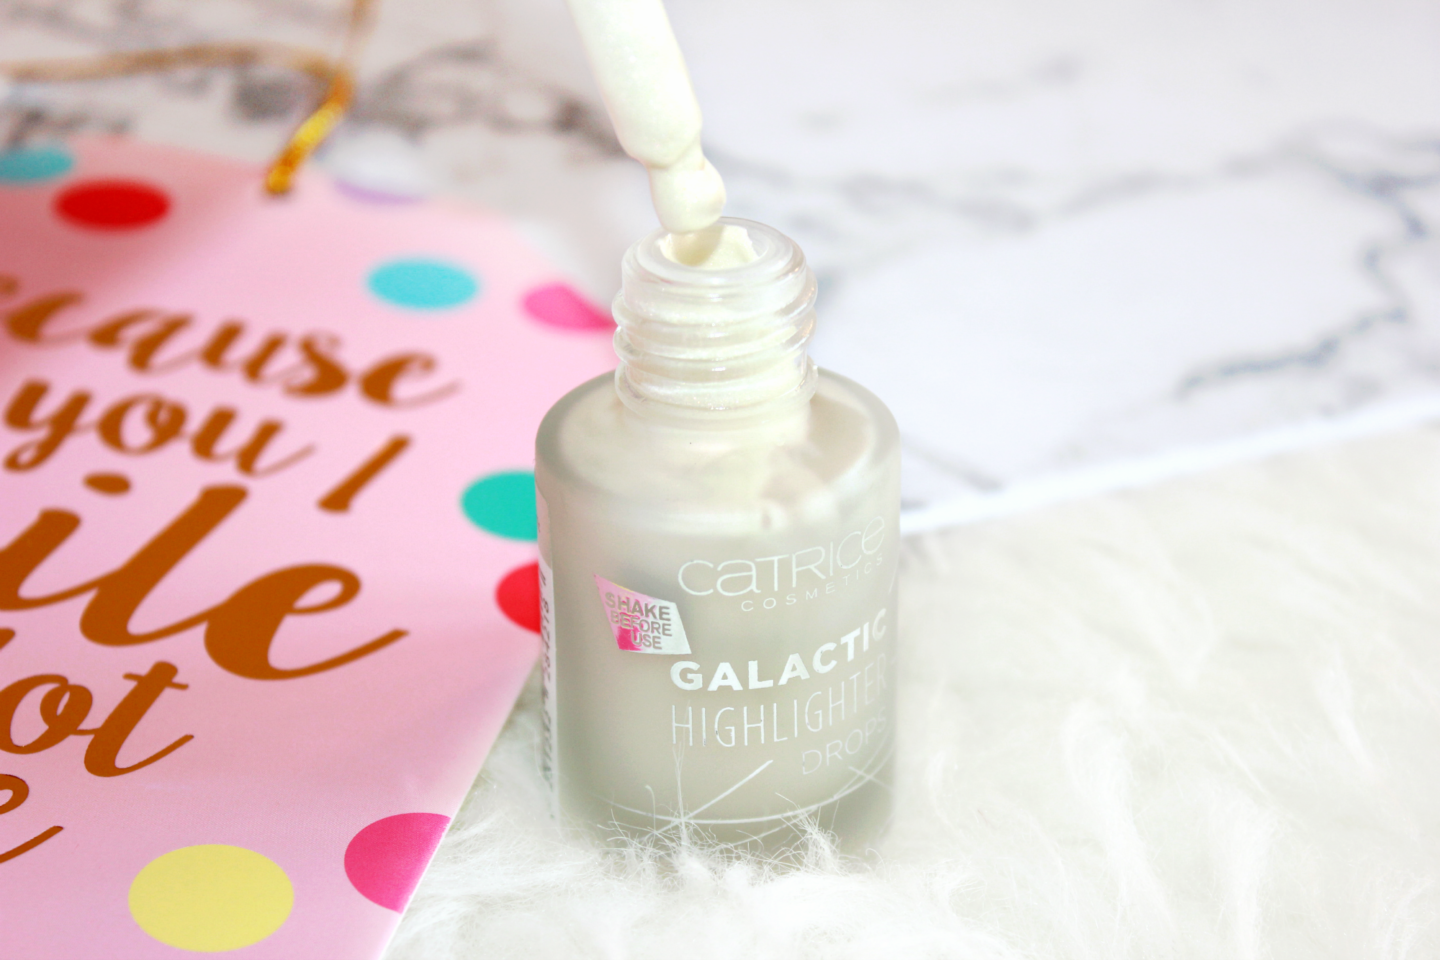 Catrice-Galactic-Highlighter-Drops-Review